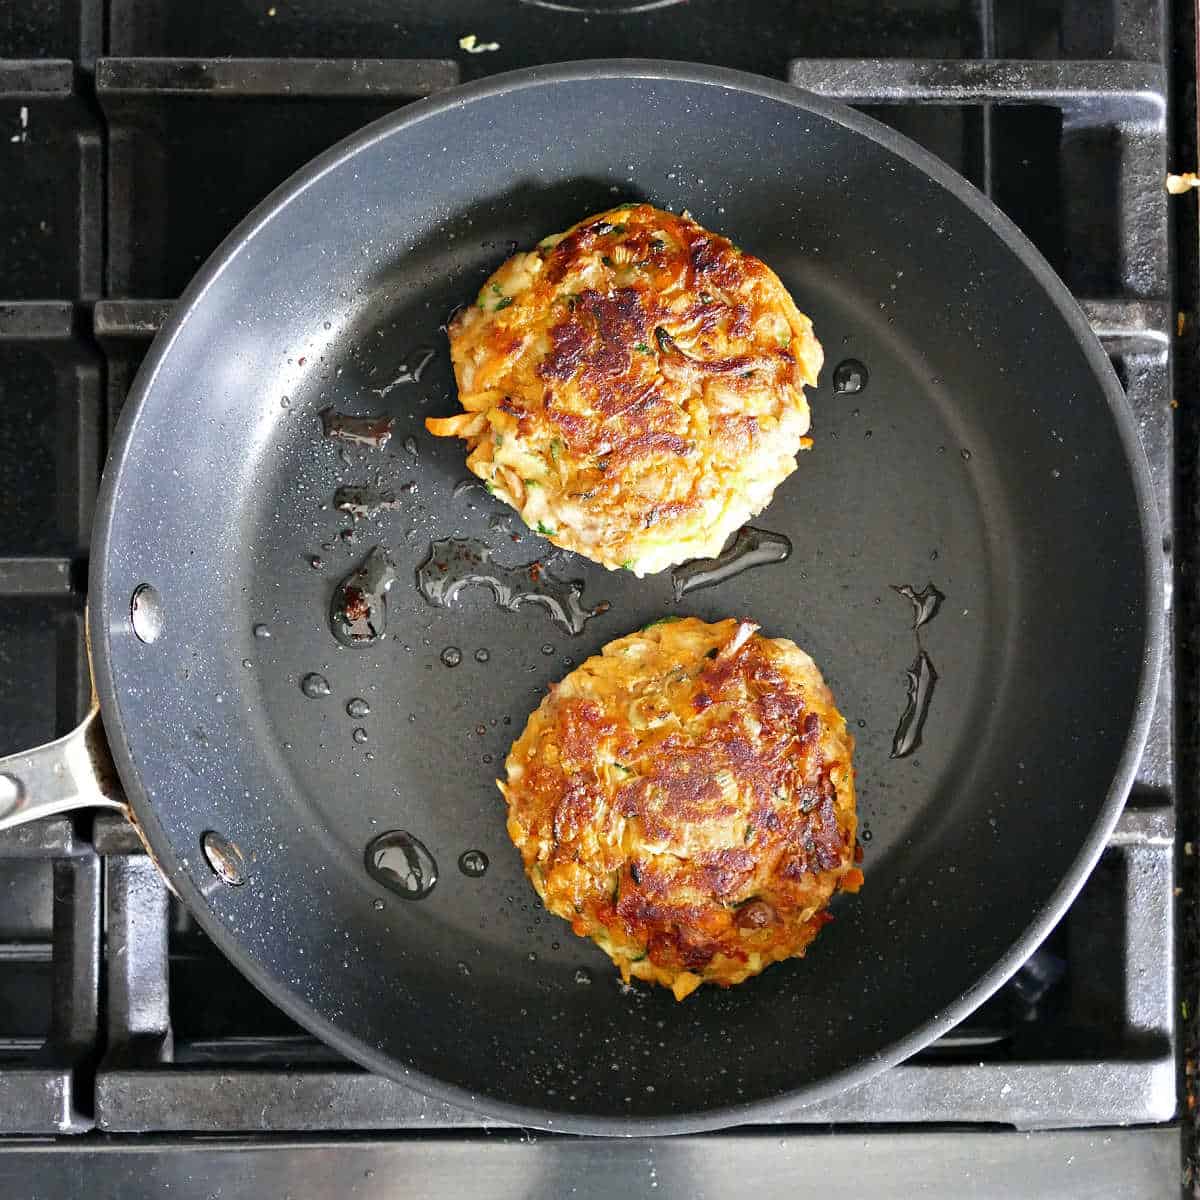 2 fritters cooking in oil in a skillet on the stove